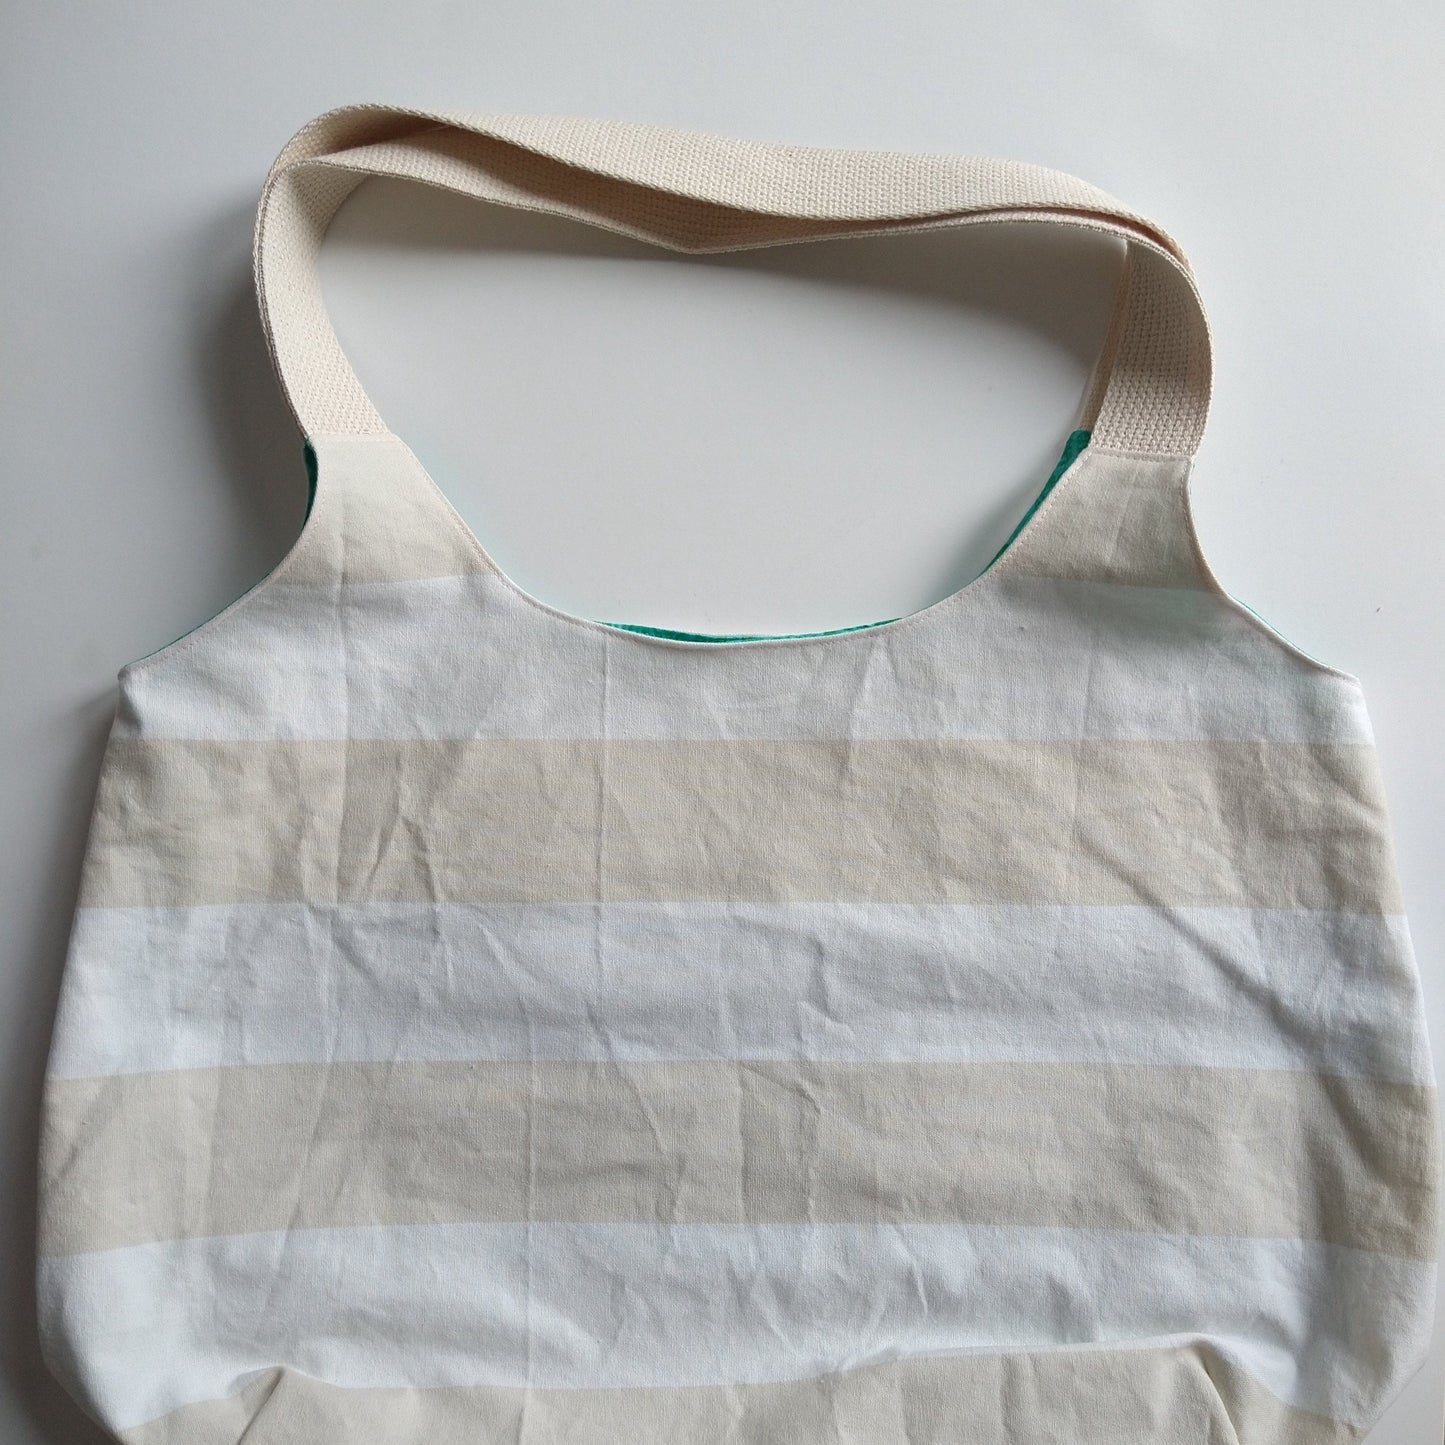 Shopping bag, reversible, size medium, natural stripes turquoise (Handmade in Canada)